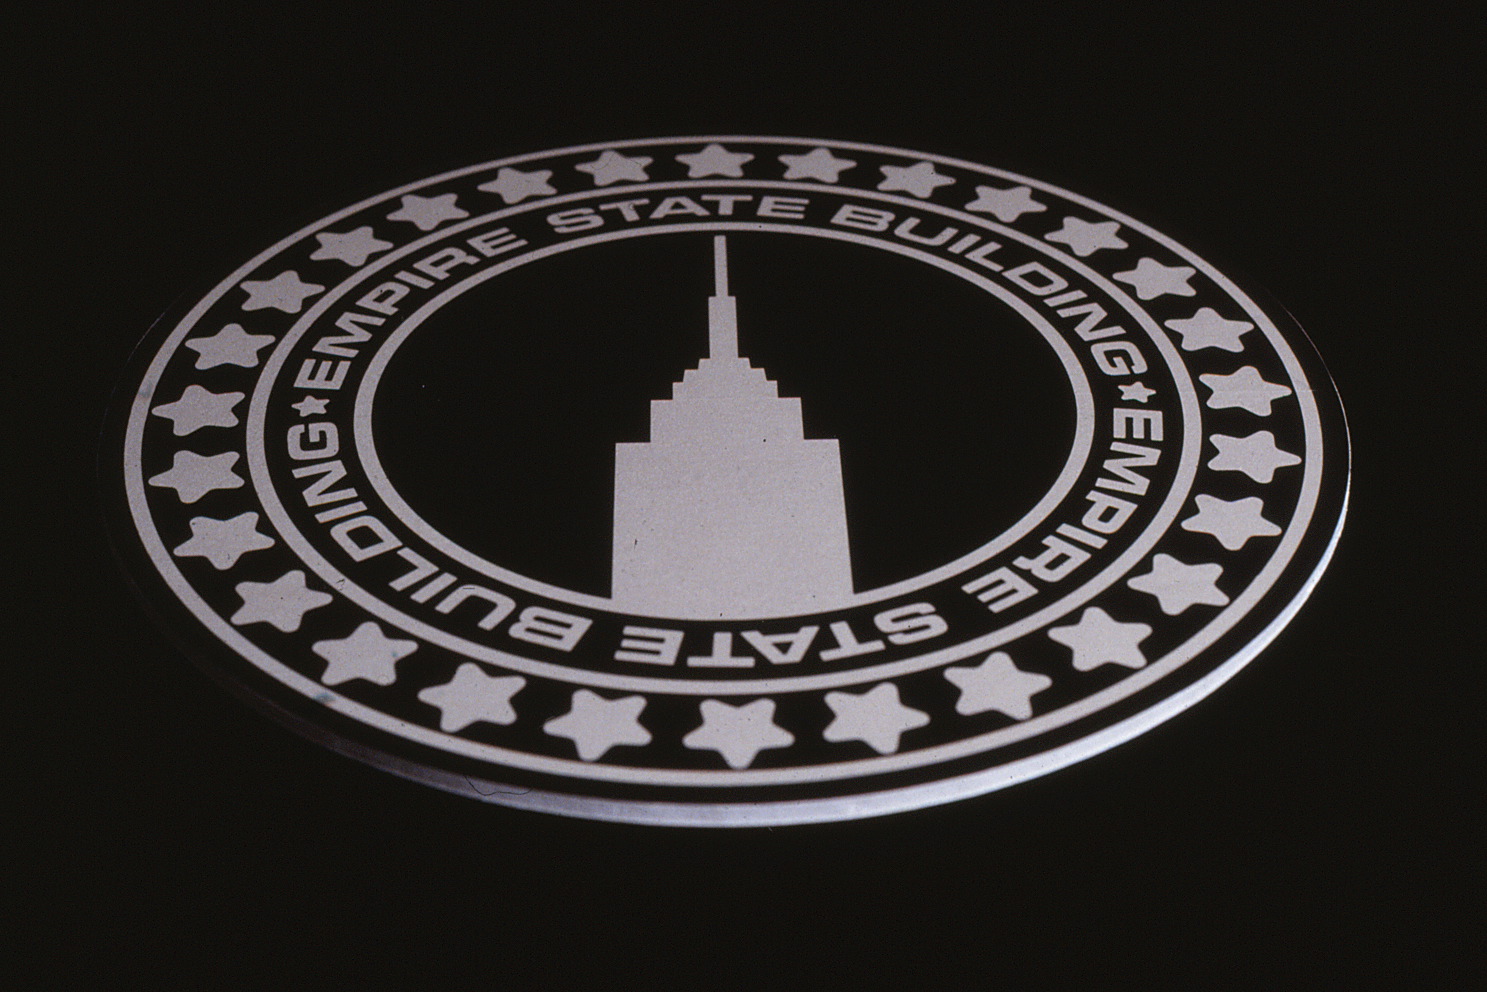 Design of a manhole cover with the Empire State design on it.